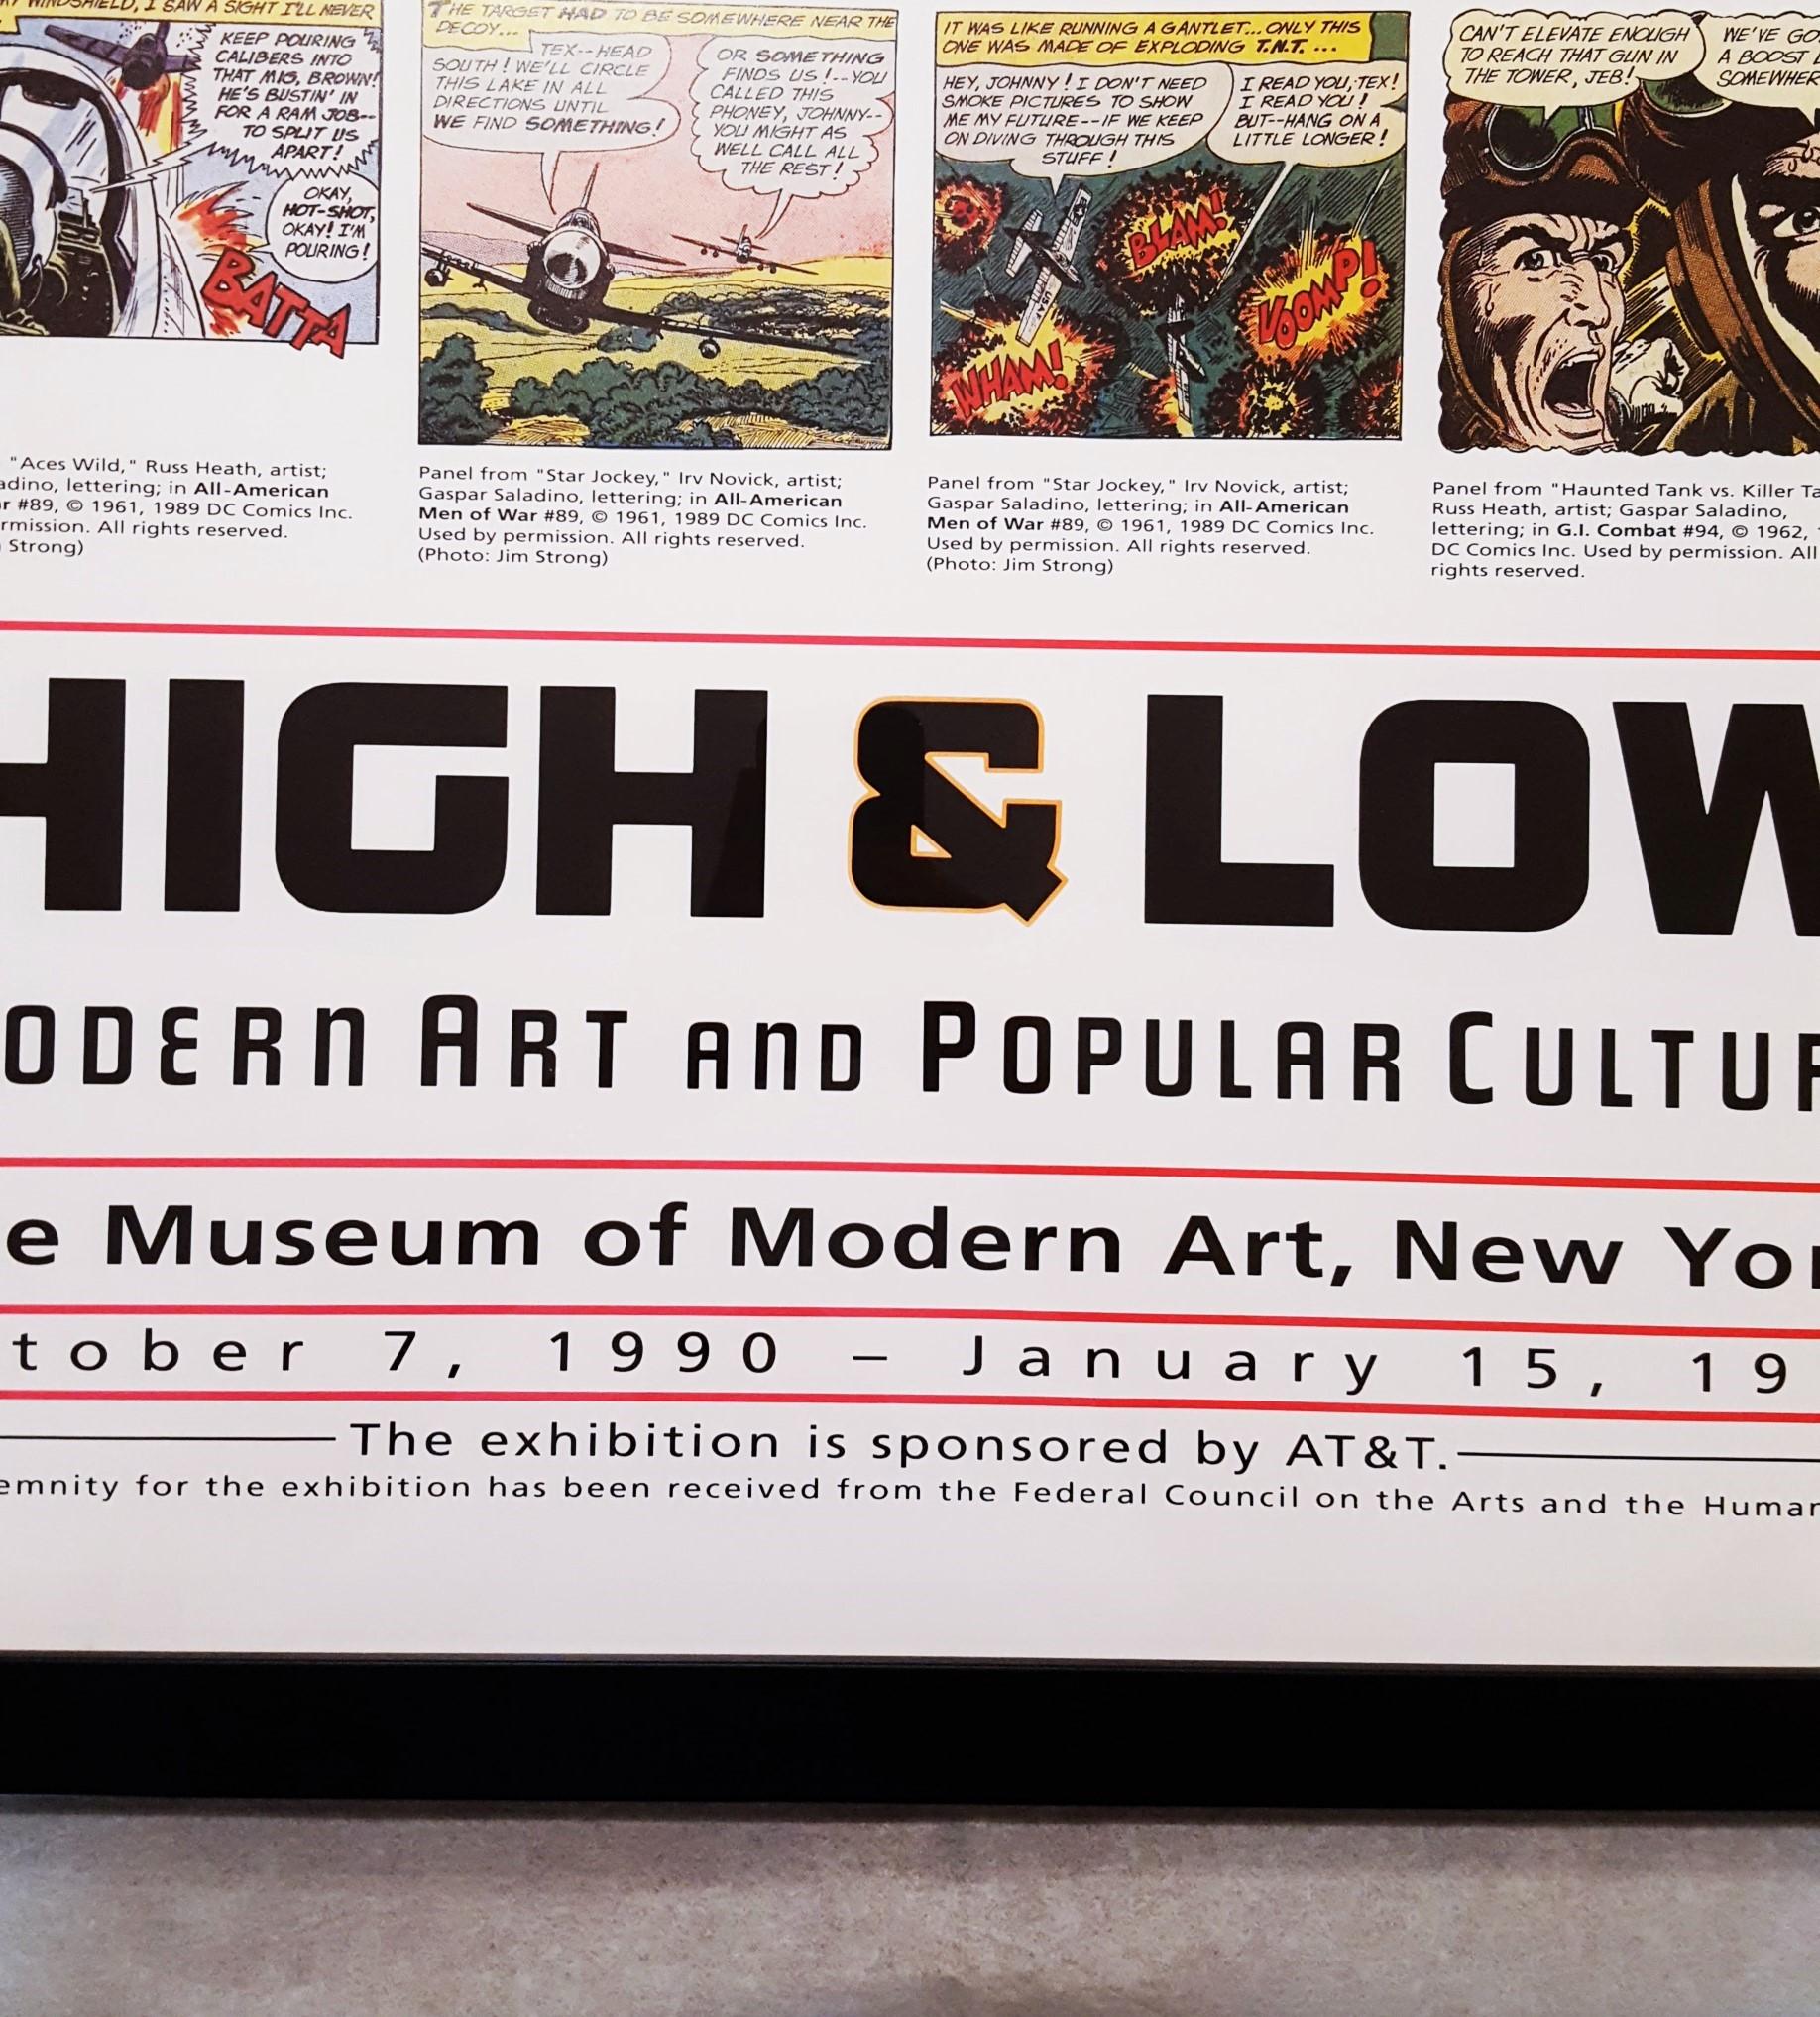 An original offset-lithograph, exhibition poster on heavy smooth wove paper after American artist Roy Lichtenstein (1923-1997) titled “High & Low. Modern Art and Popular Culture (MoMA)”, 1990. Edition size unknown, presumed small. Printer unknown,